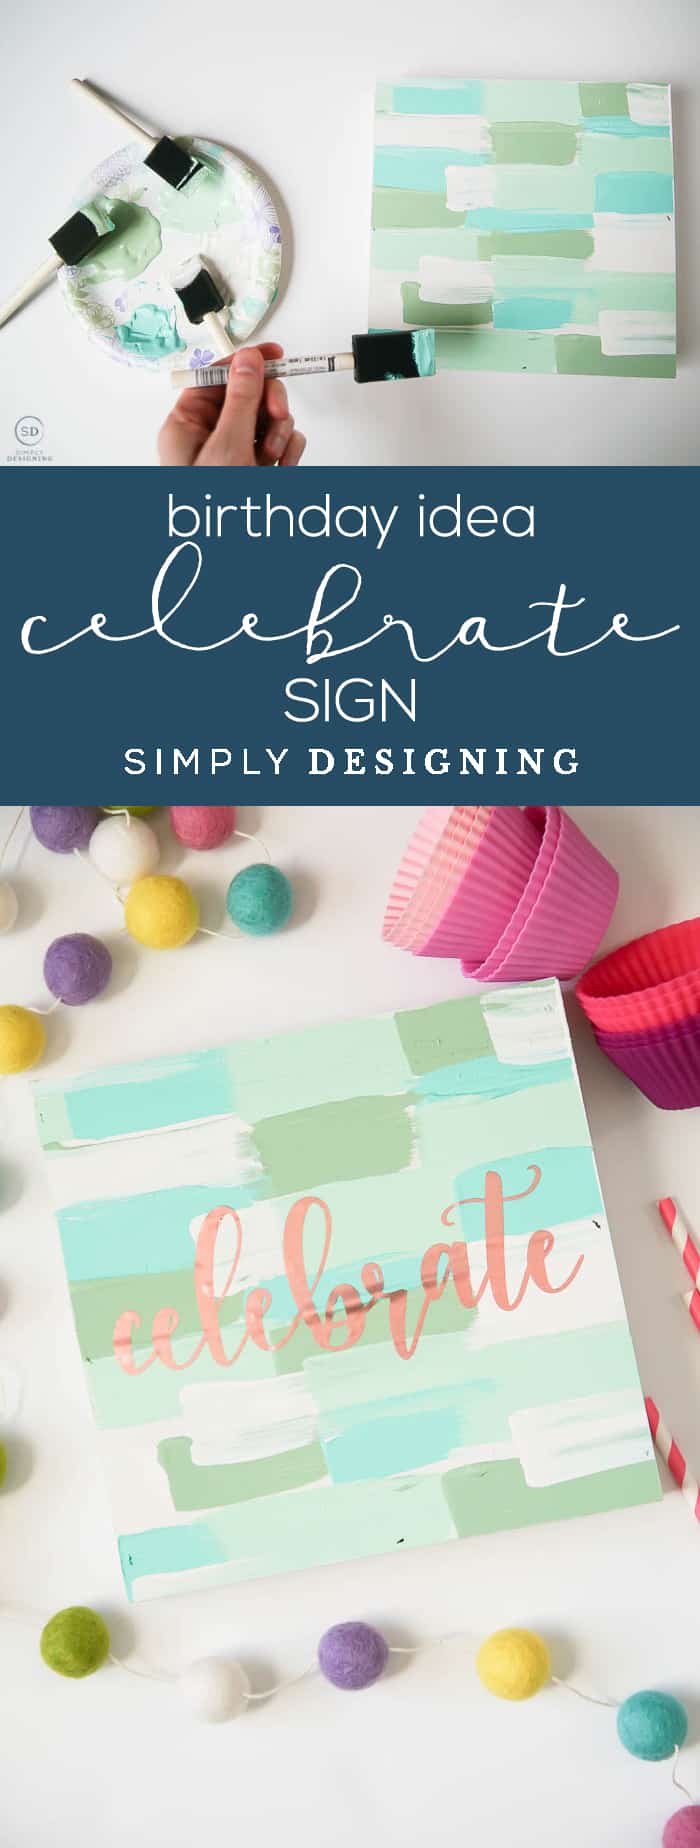 Birthday Idea - Handmade Sign - Celebrate Sign - cute sign made with vinyl paint and a wood shadowbox